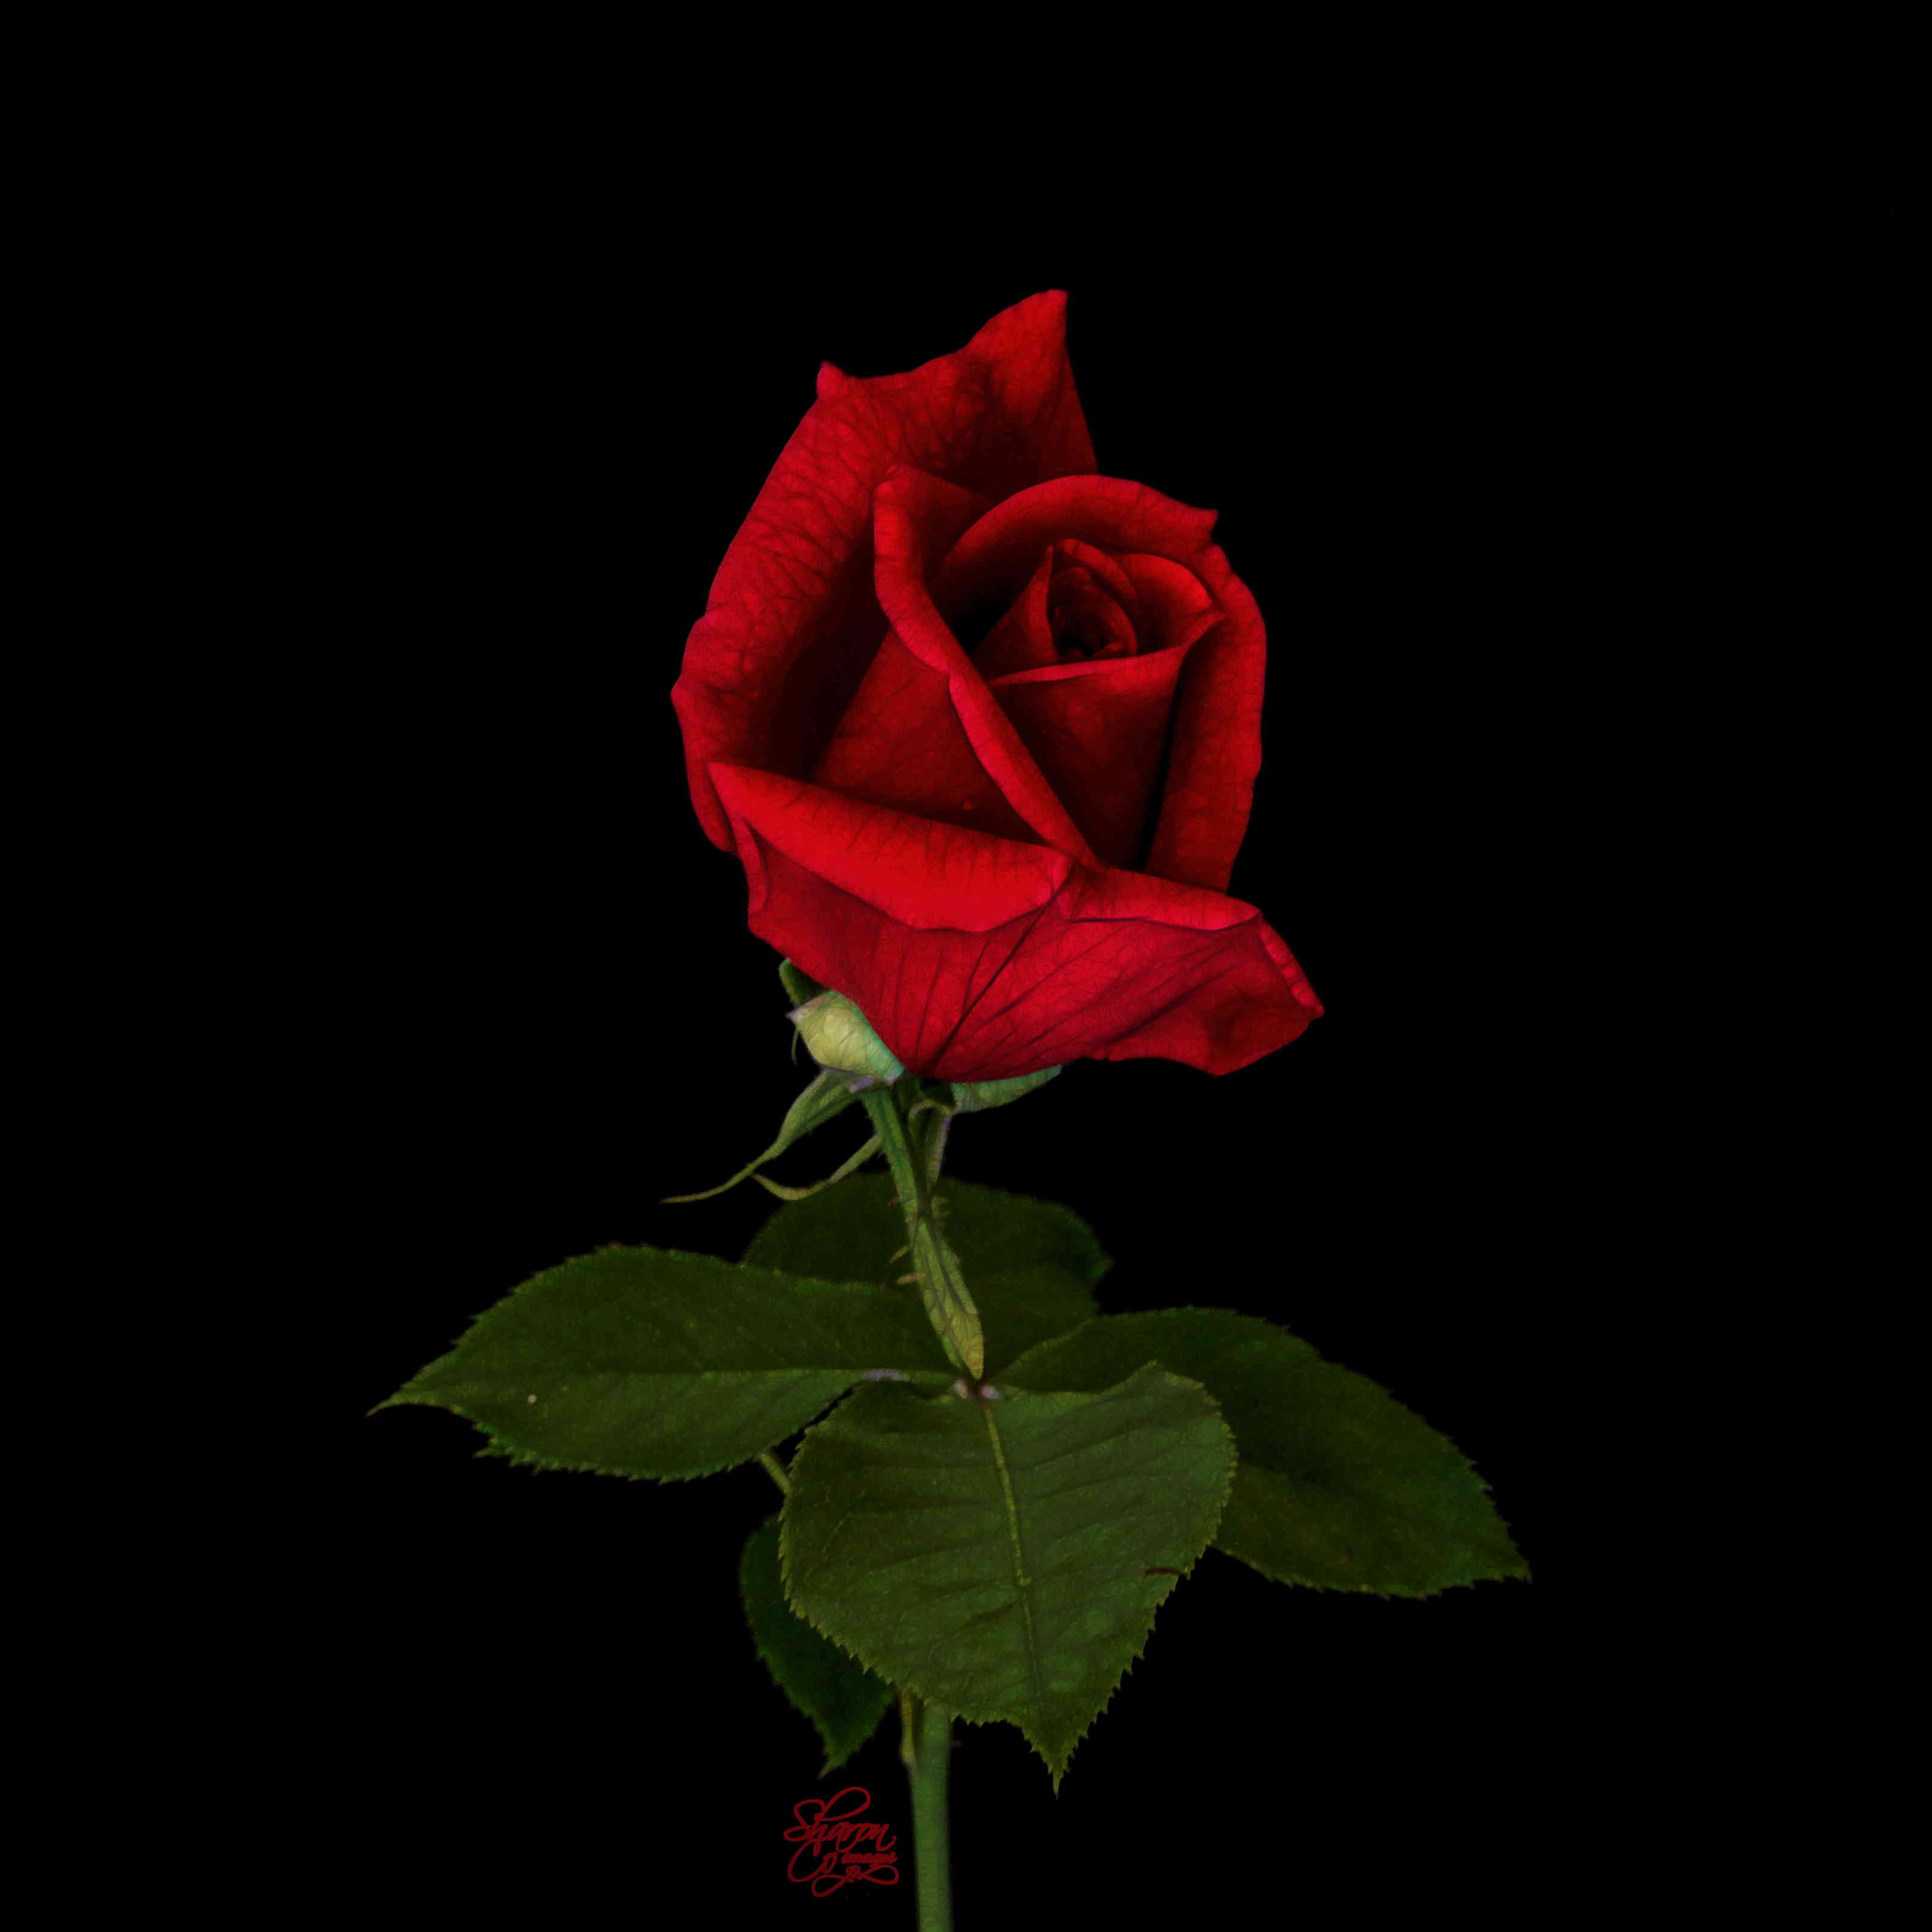 Single red rose photo